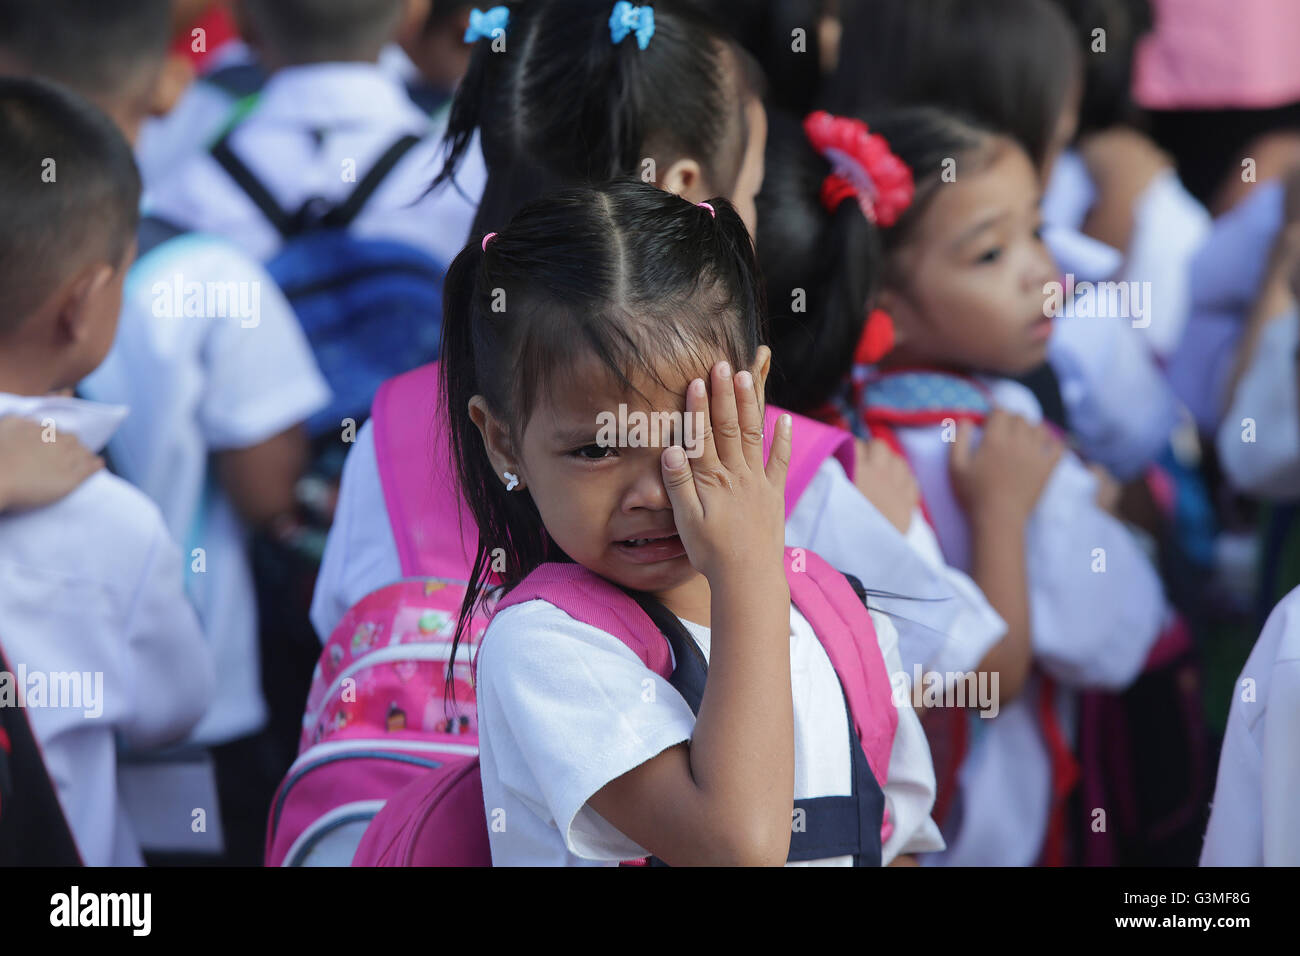 (160613) -- QUEZON CITY (THE PHILIPPINES), June 13, 2016 (Xinhua) -- A student cries during the first day of school at the President Corazon Aquino Elementary School in Quezon City, the Philippines, on June 13, 2016. Around 25 million students attended elementary and high school classes all over the country at the beginning of the school year 2016-2017, according to the Philippine Department of Education. (Xinhua/Rouelle Umali) Stock Photo